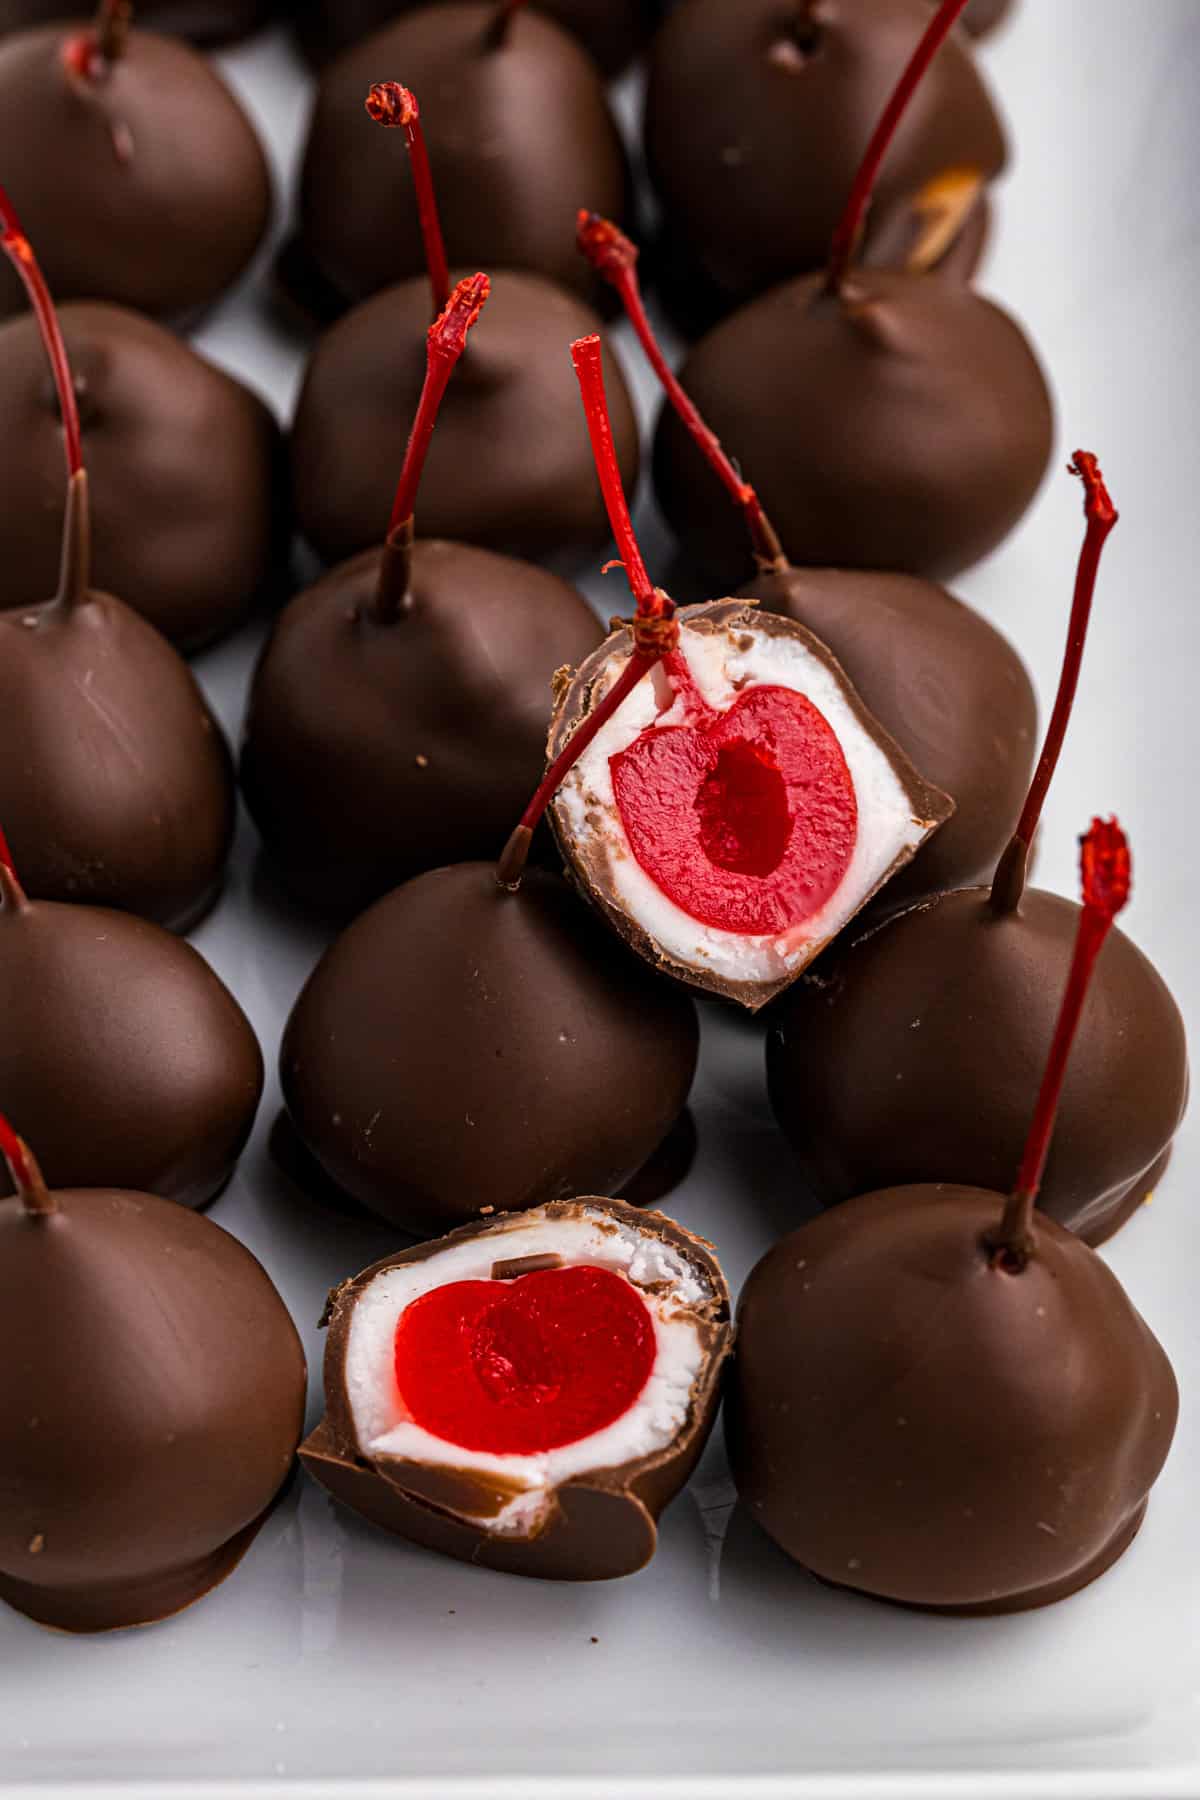 Chocolate Covered Cherries sliced over lined on a serving tray